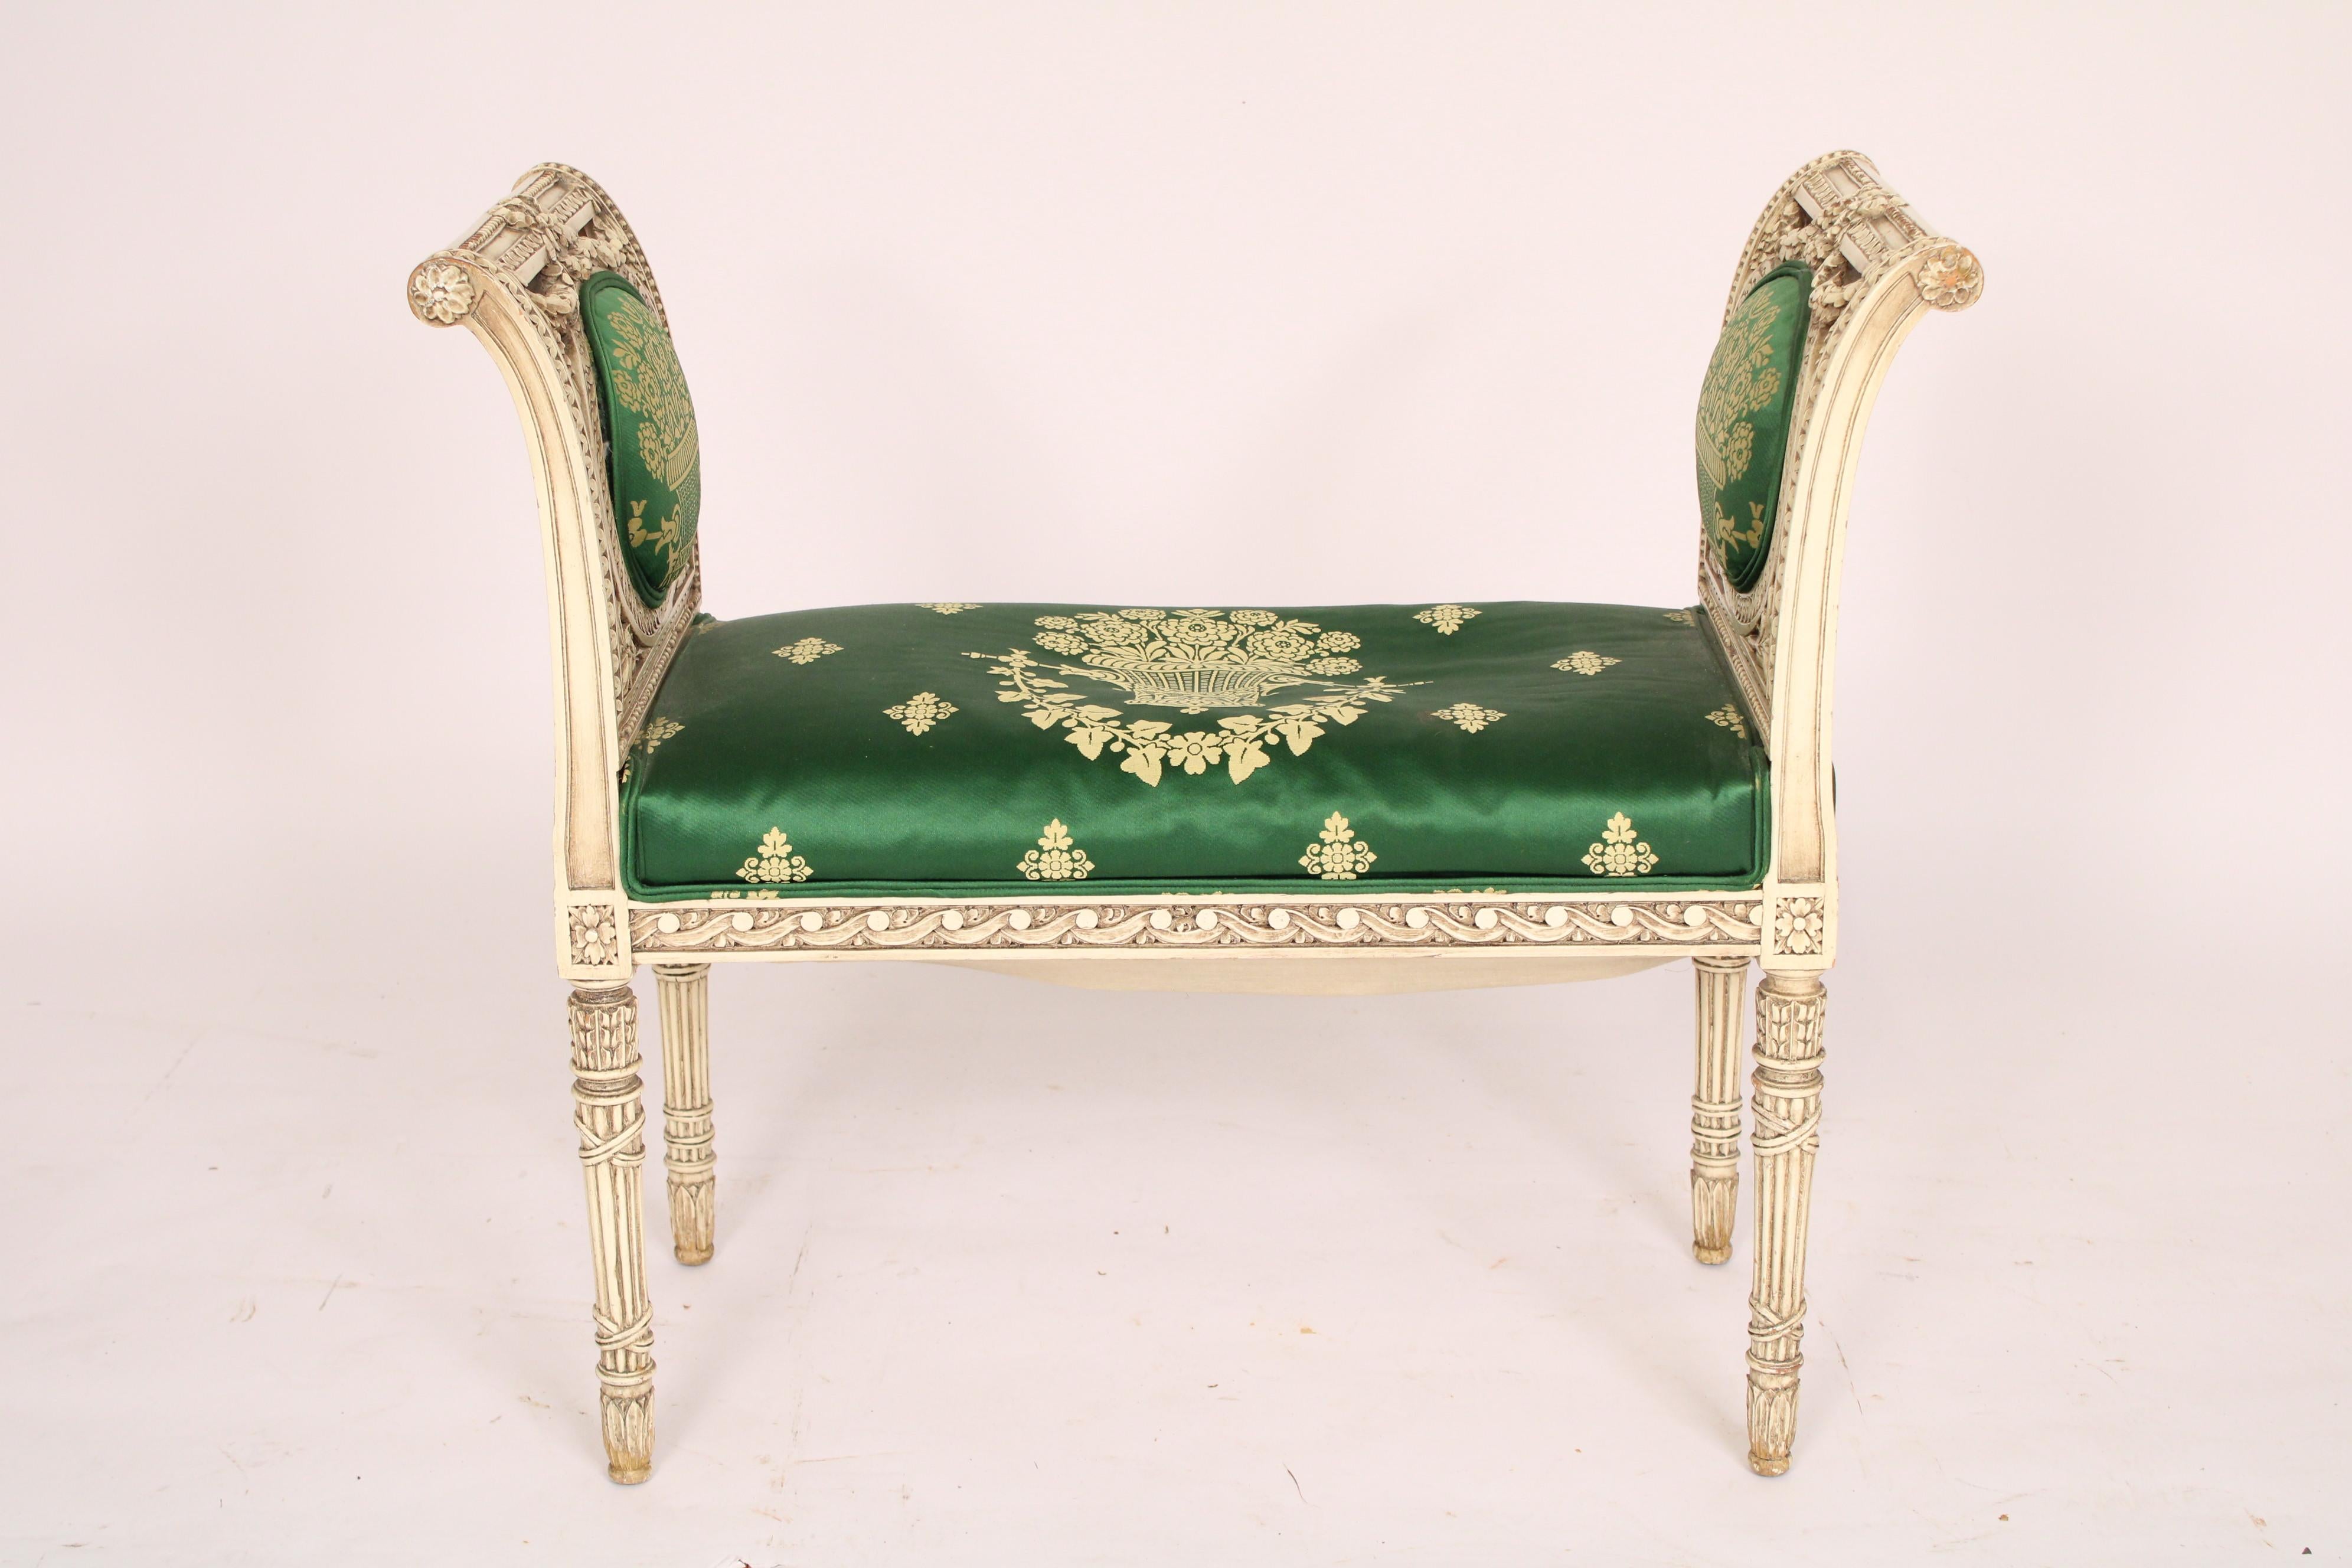 Louis XVI style painted bench, circa 1930s. The two arms carved with floral swags, gouilloche and floral designs, the green silk seat with neoclassic upholstery, resting on 4 reeded quiver style legs.